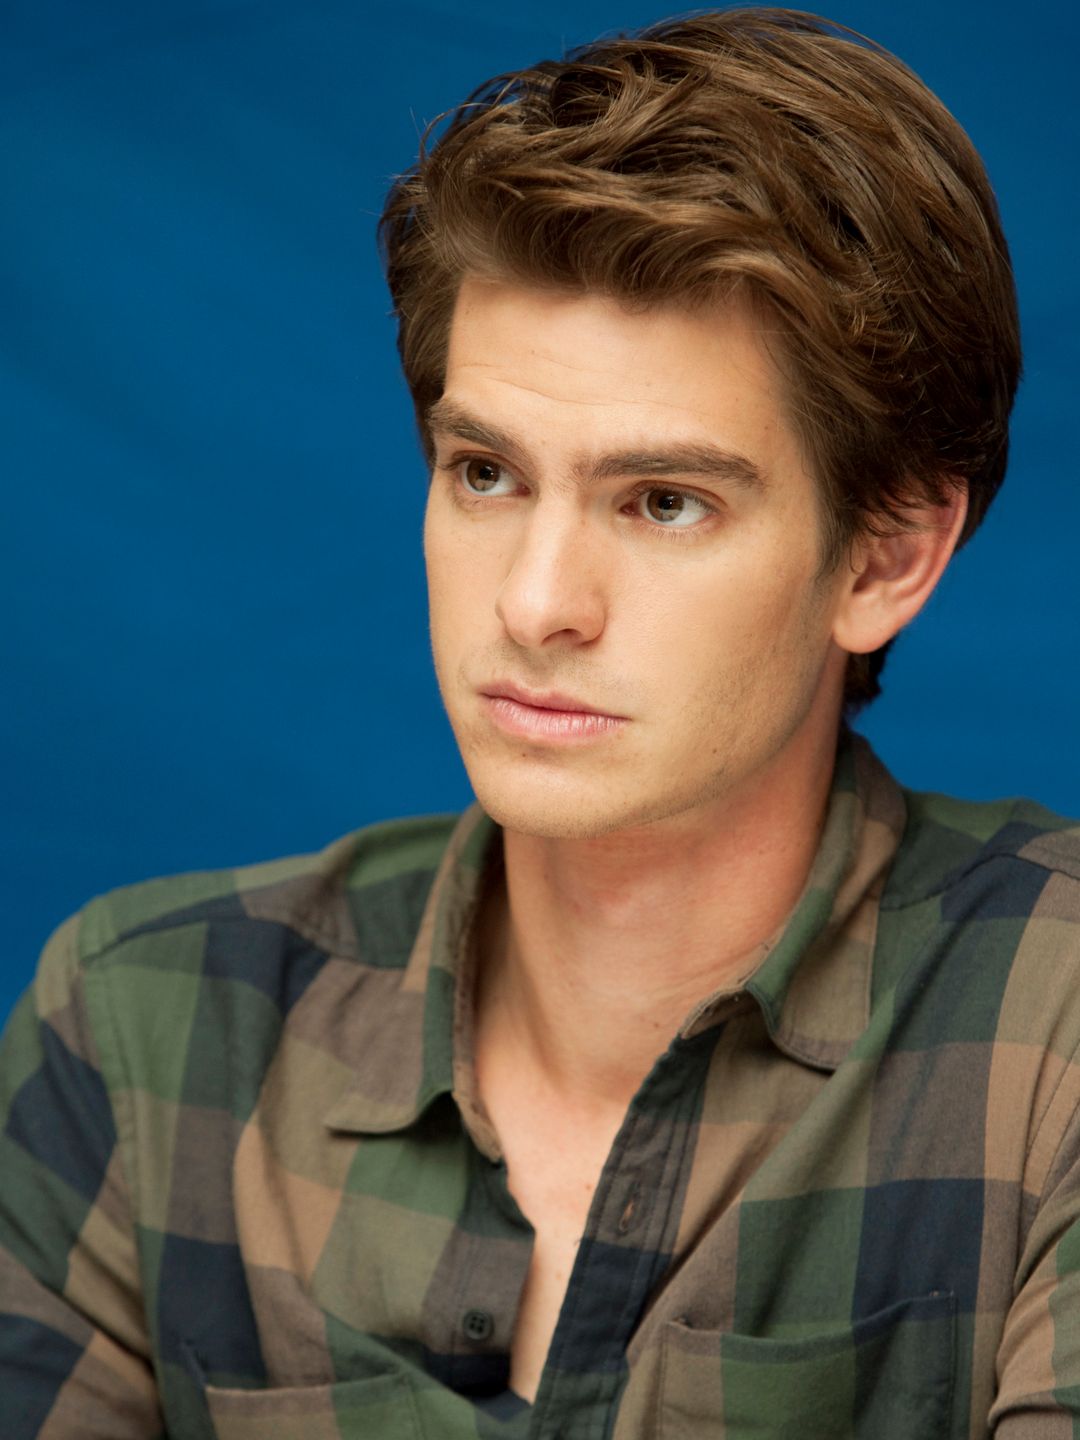 Andrew Garfield who is his father